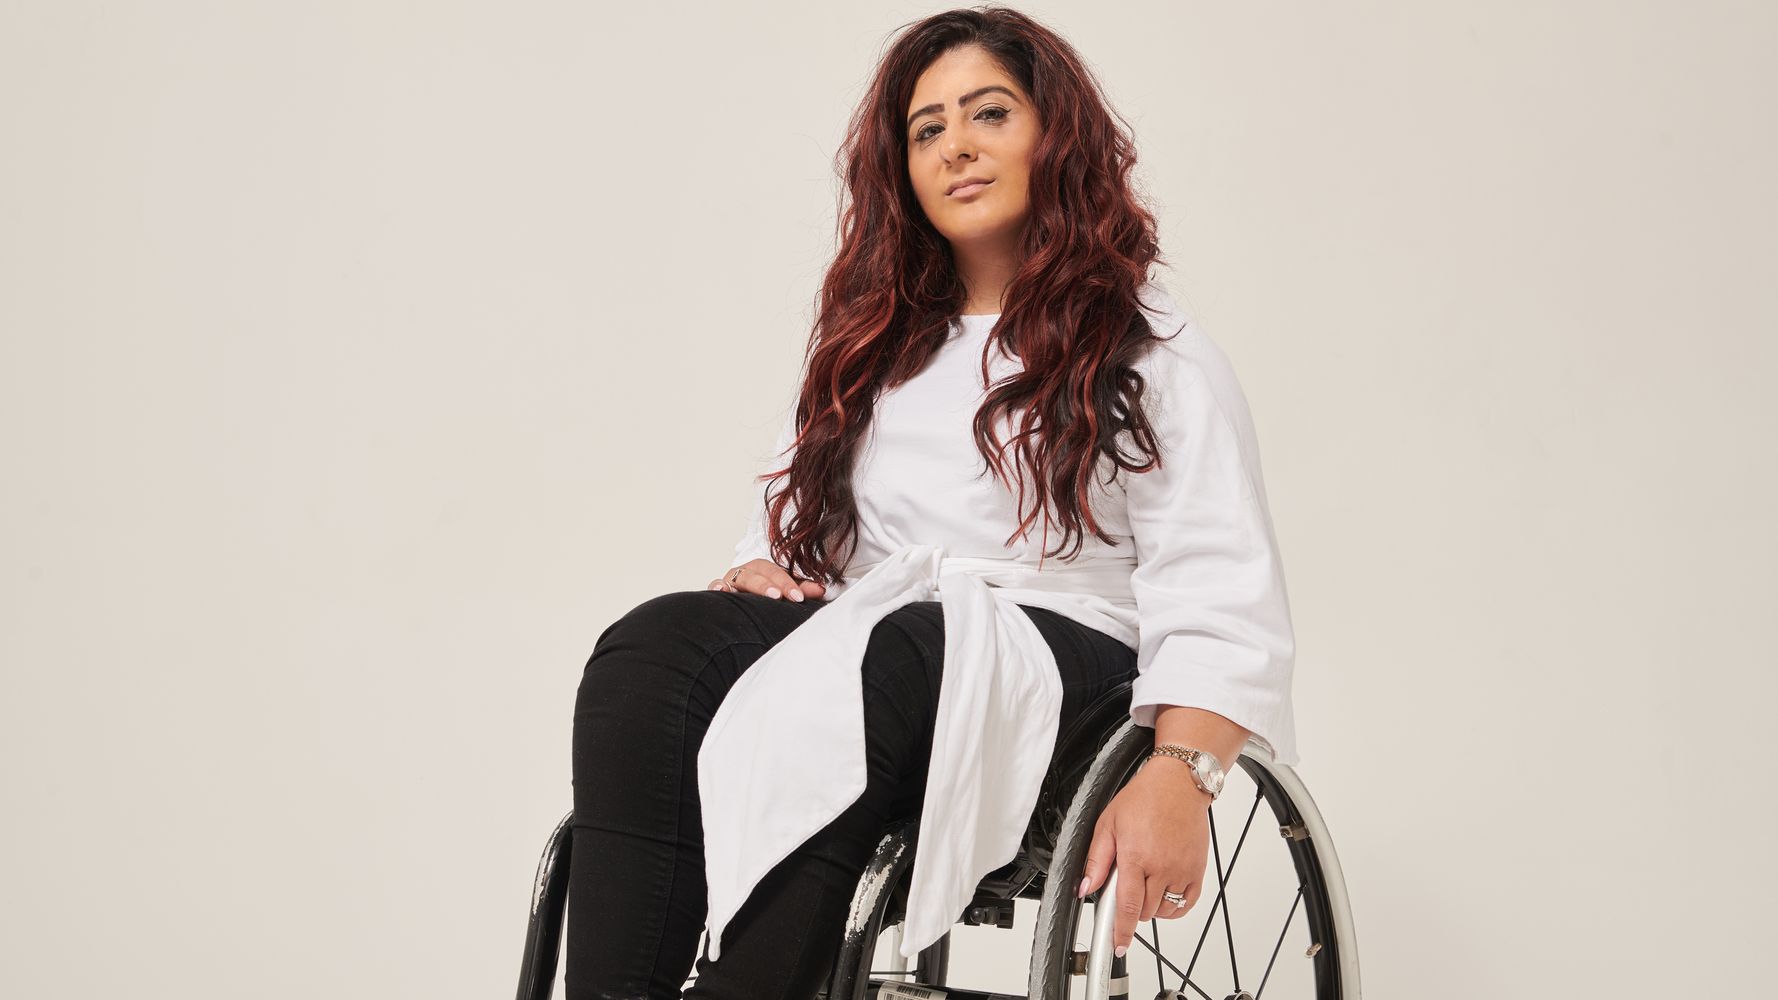 Primark releases new adaptive clothing range with research from